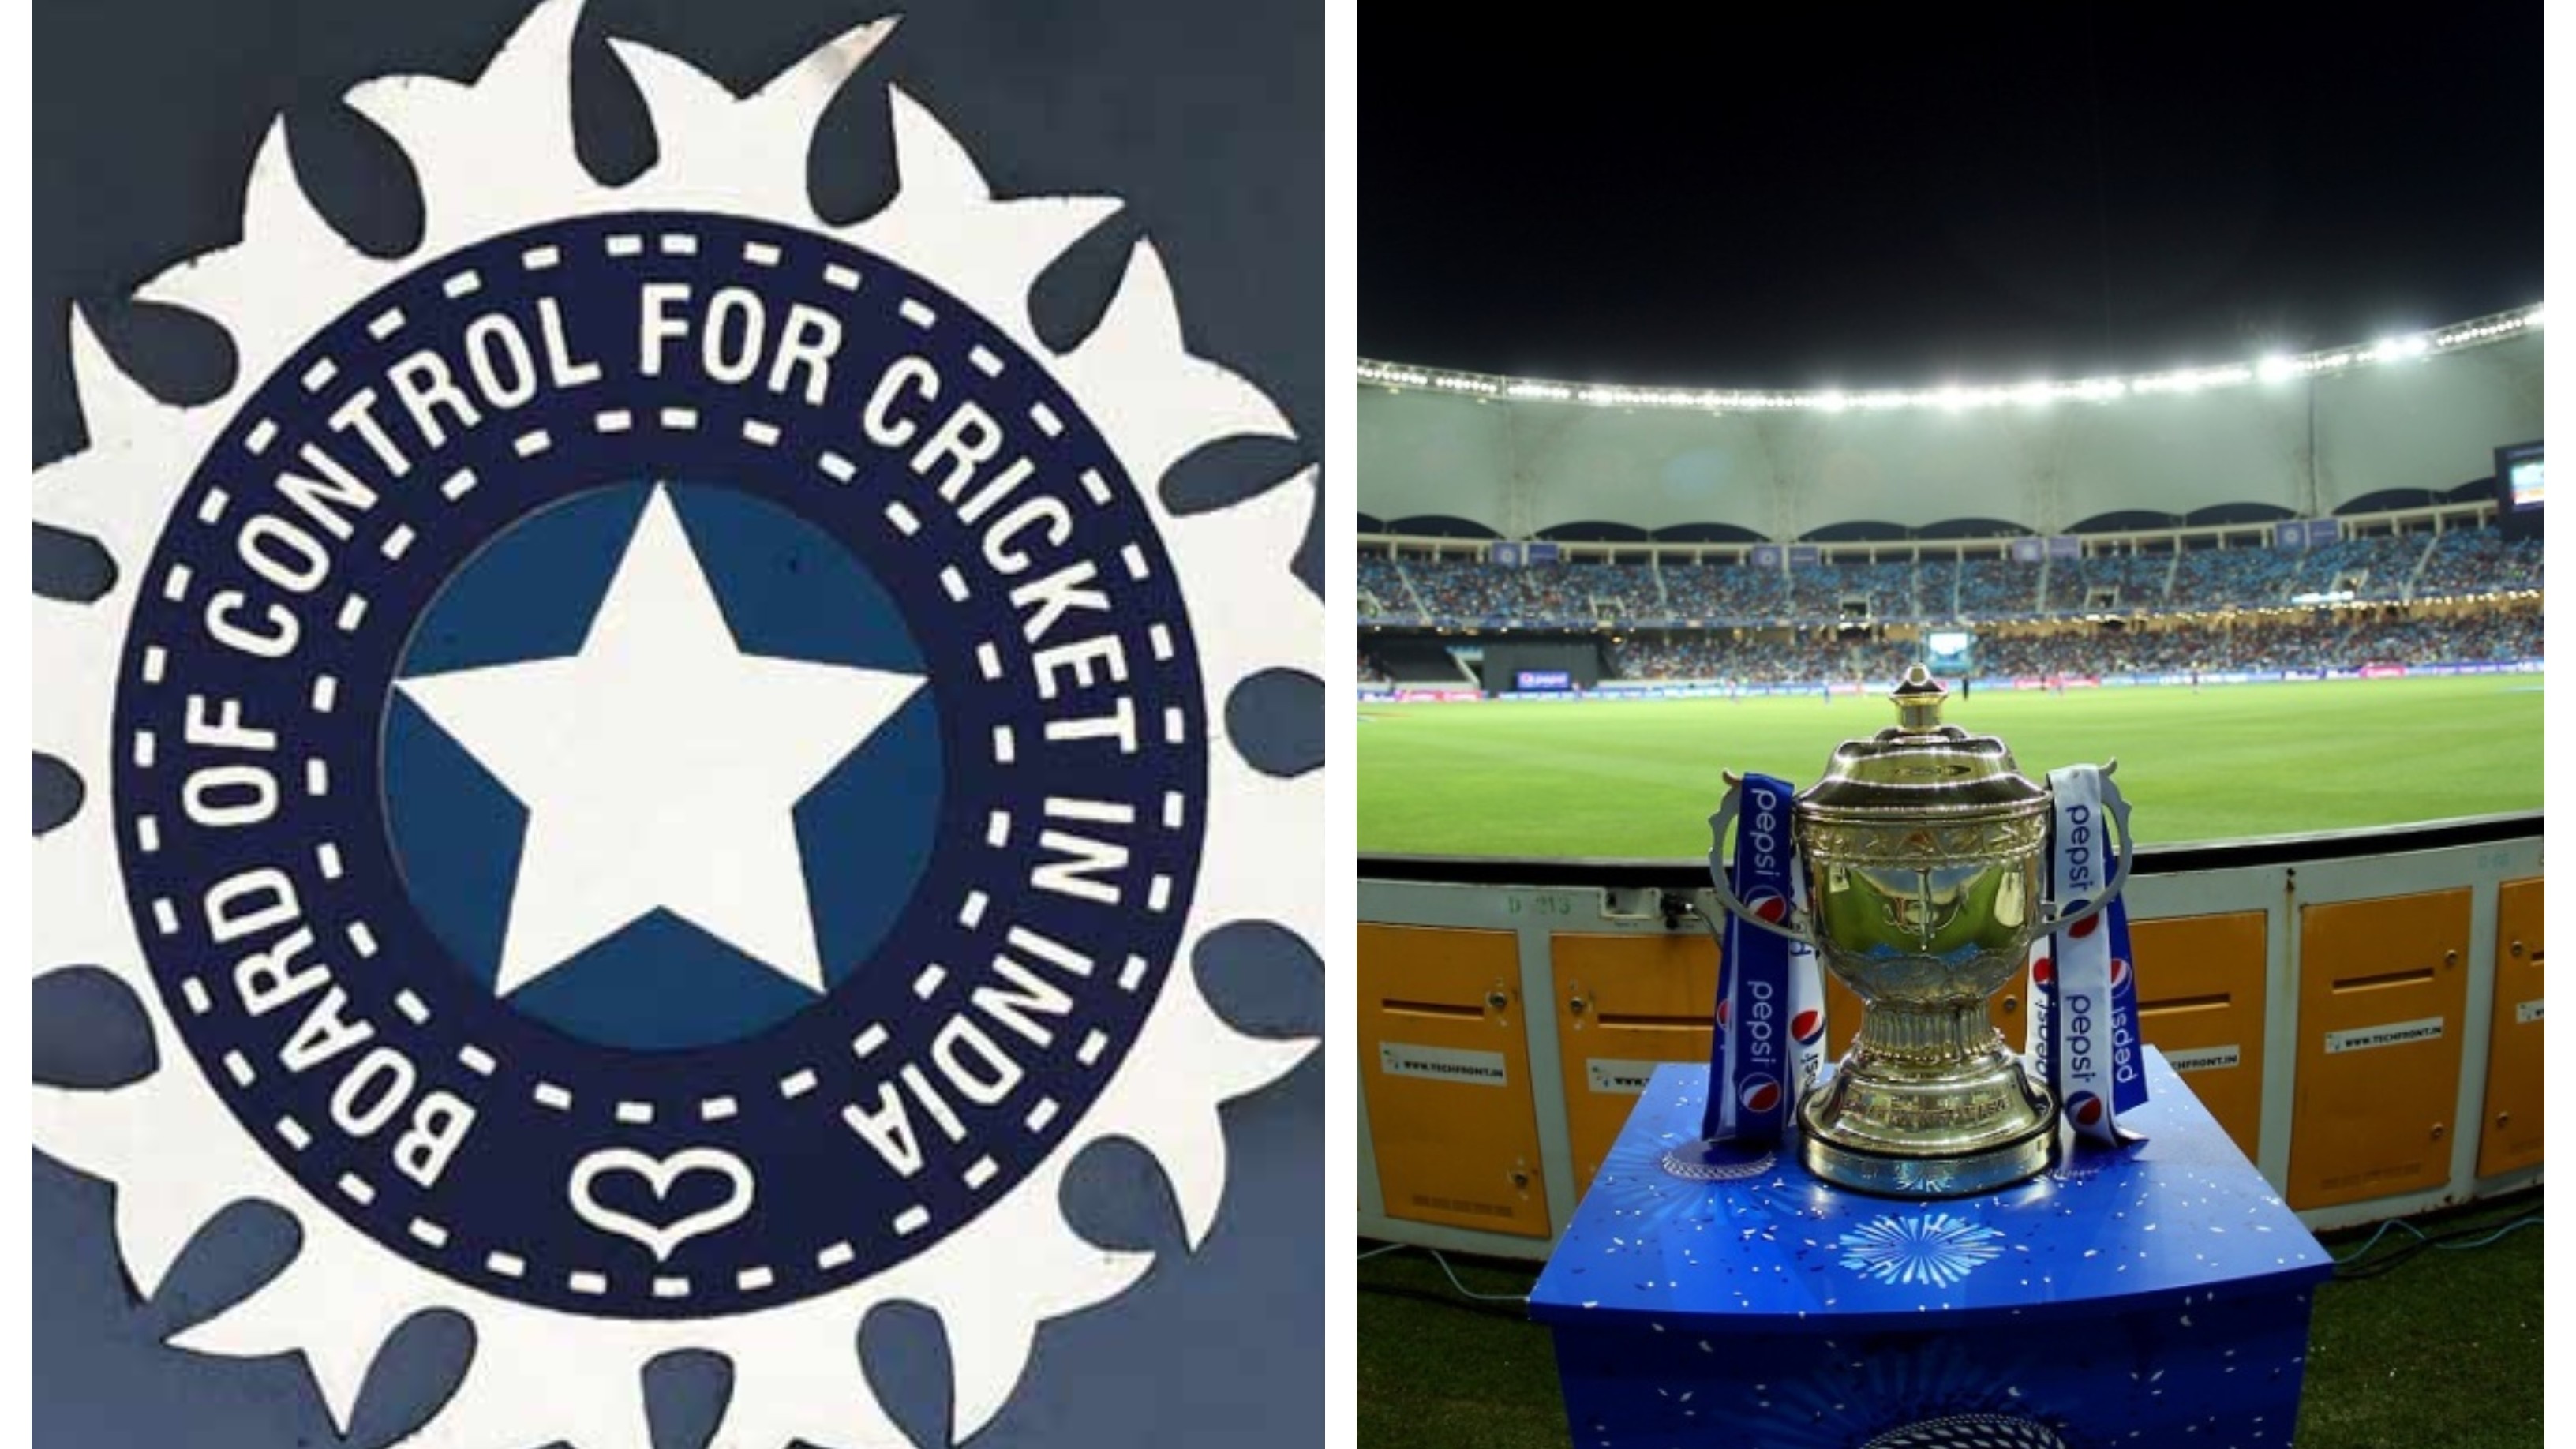 IPL 2020: BCCI issues statement after 13 personnel tested COVID-19 positive ahead of IPL 13 in UAE